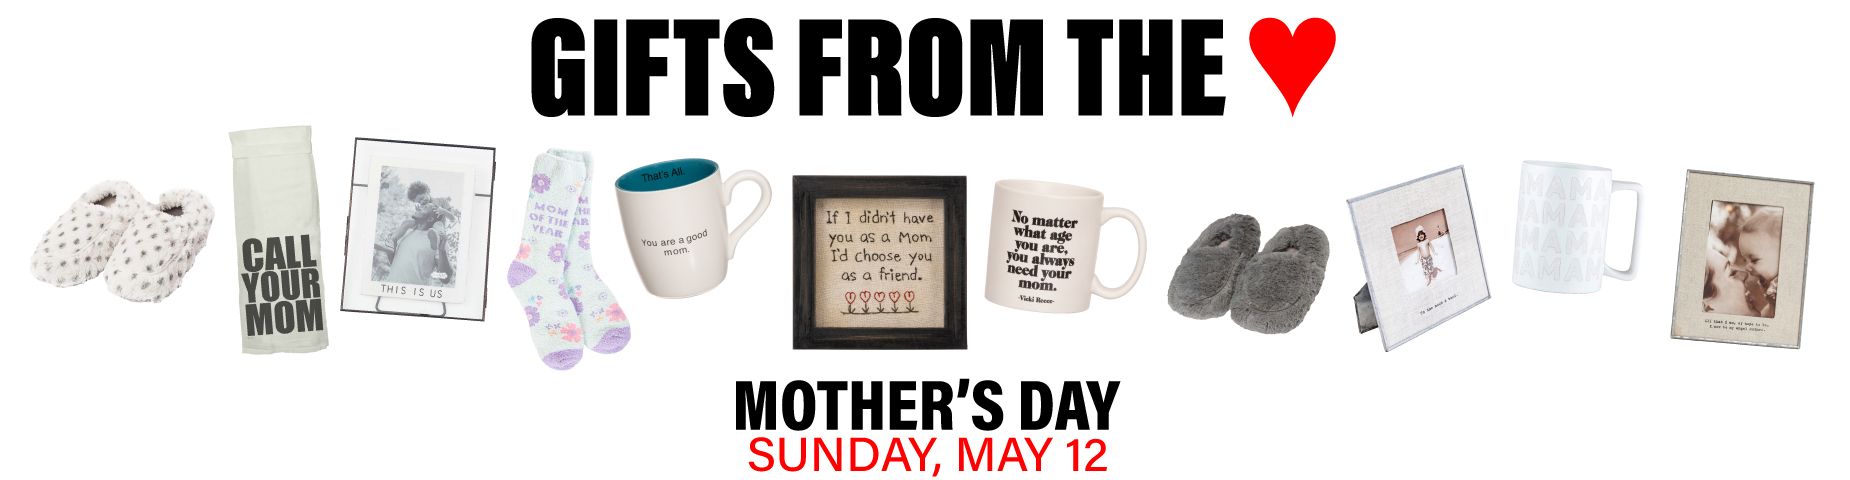 GIFTS FROM THE ♥: Mother's Day, Sun. May 12